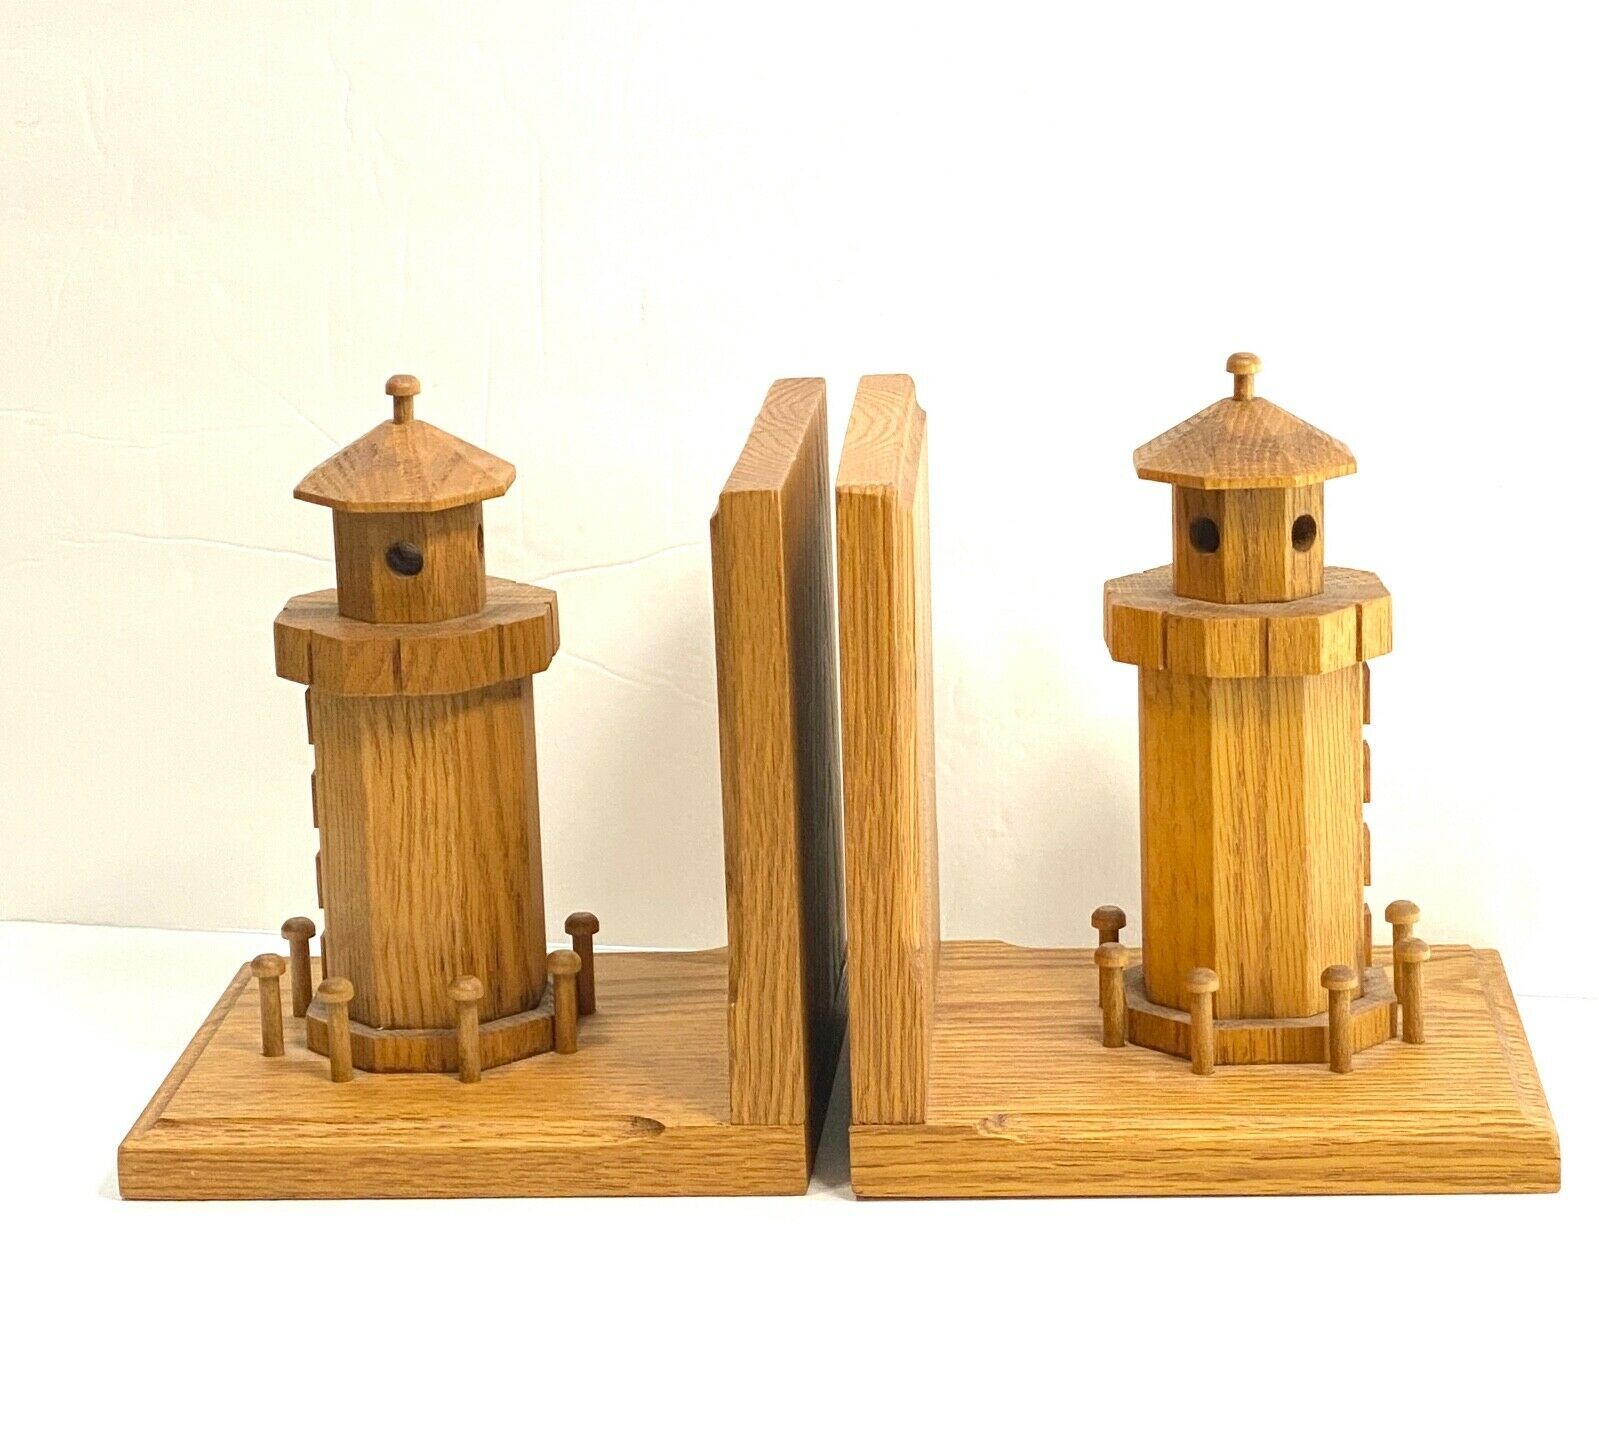 Amish Wooden Lighthouse Bookends - $69.99